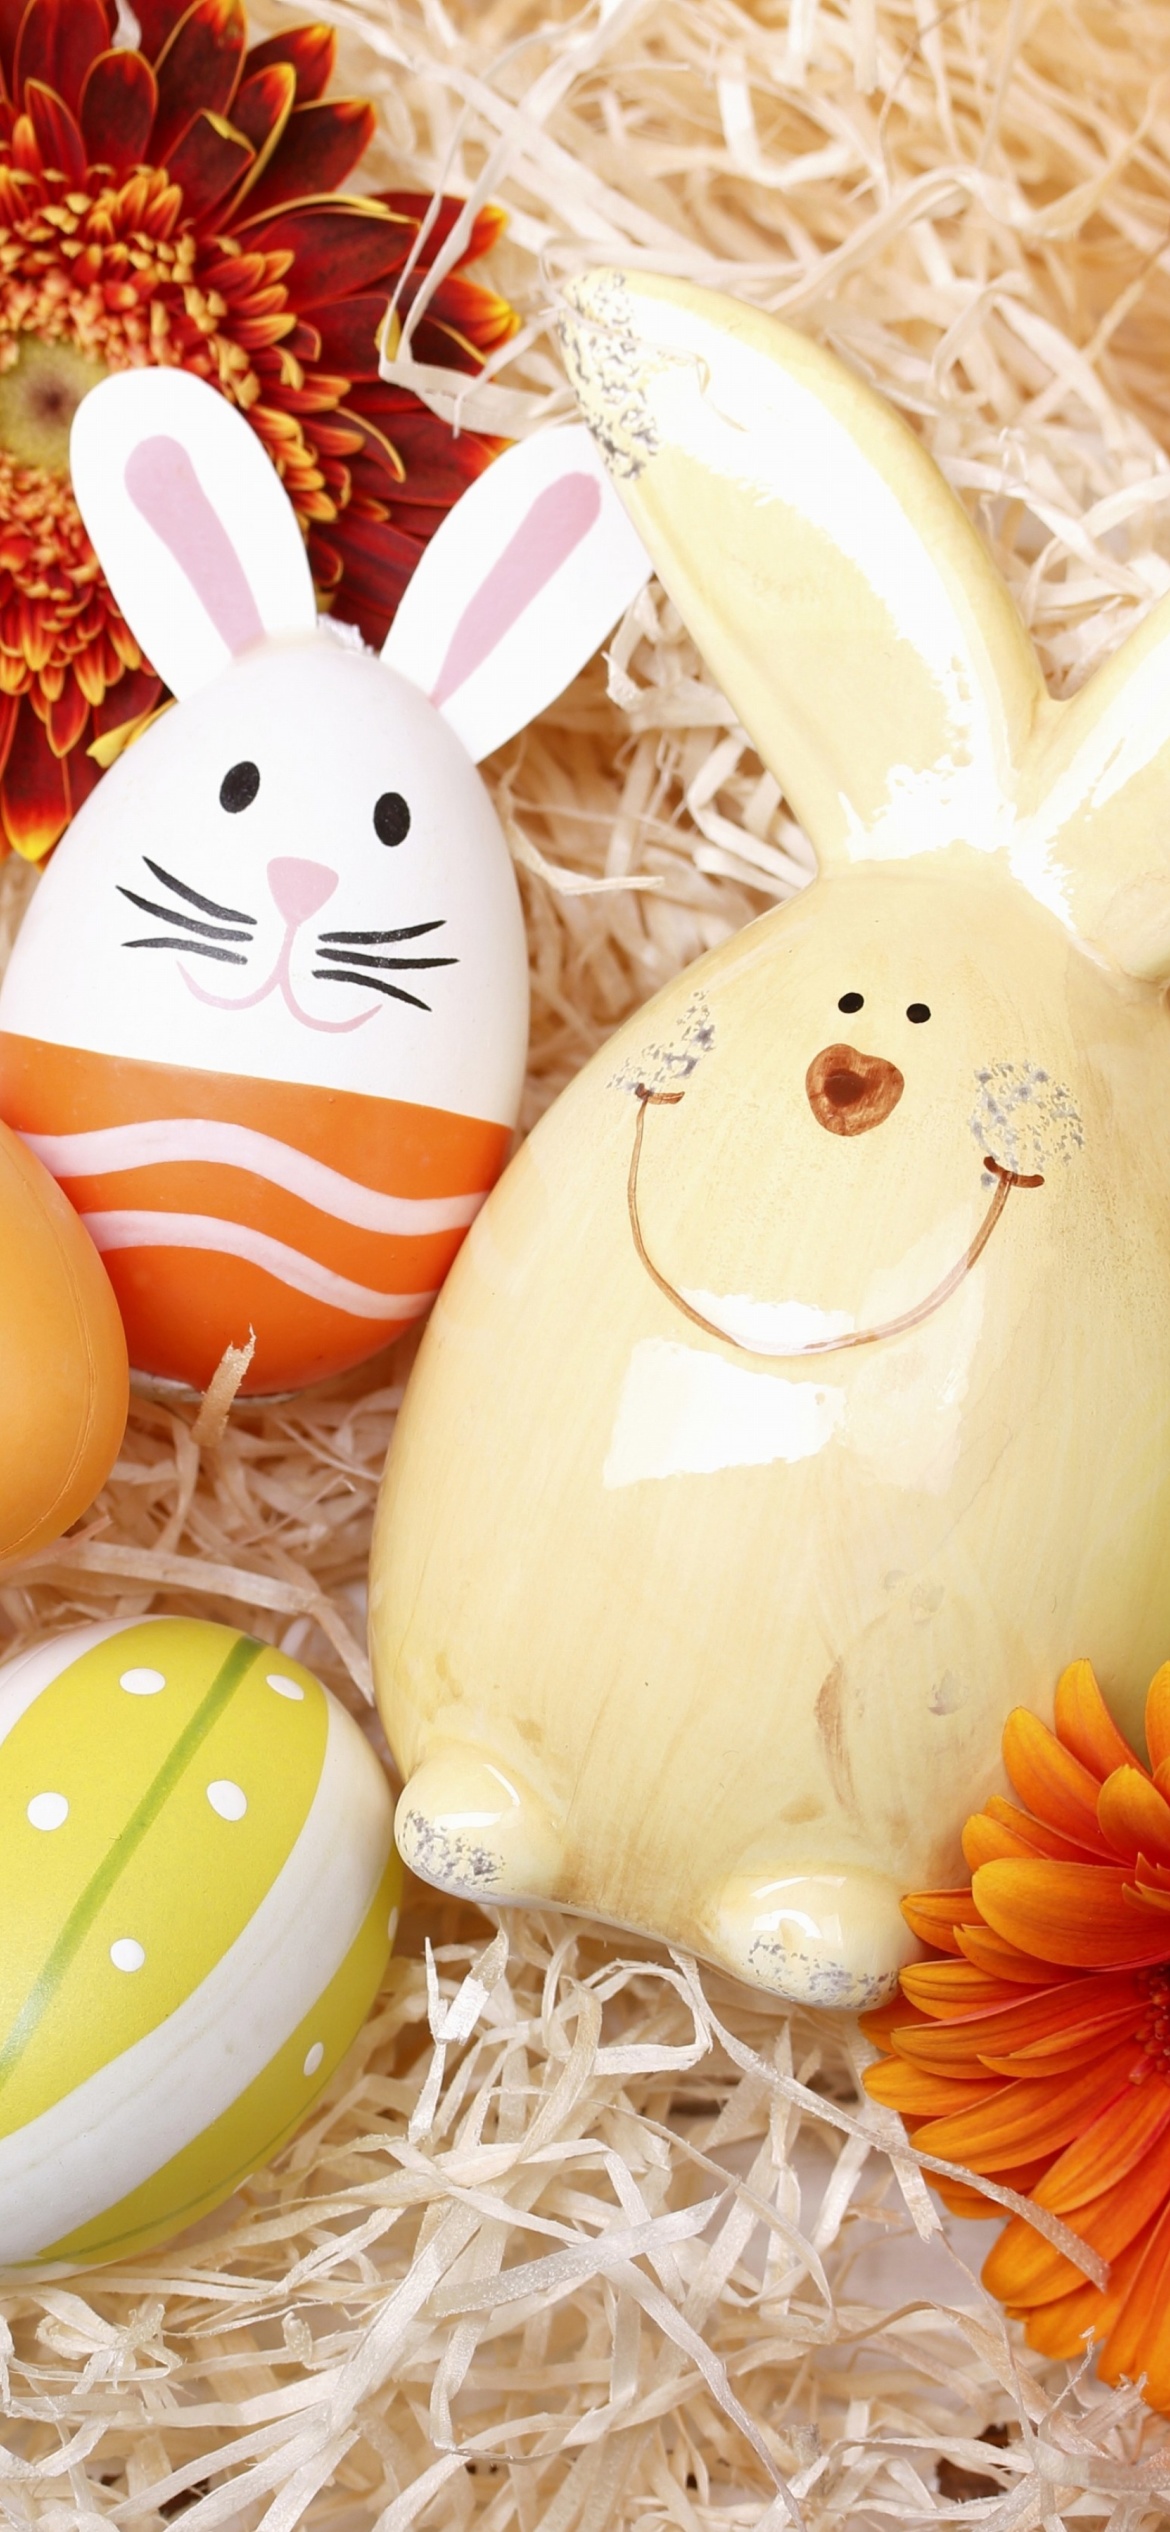 Easter Eggs Decoration with Hare screenshot #1 1170x2532